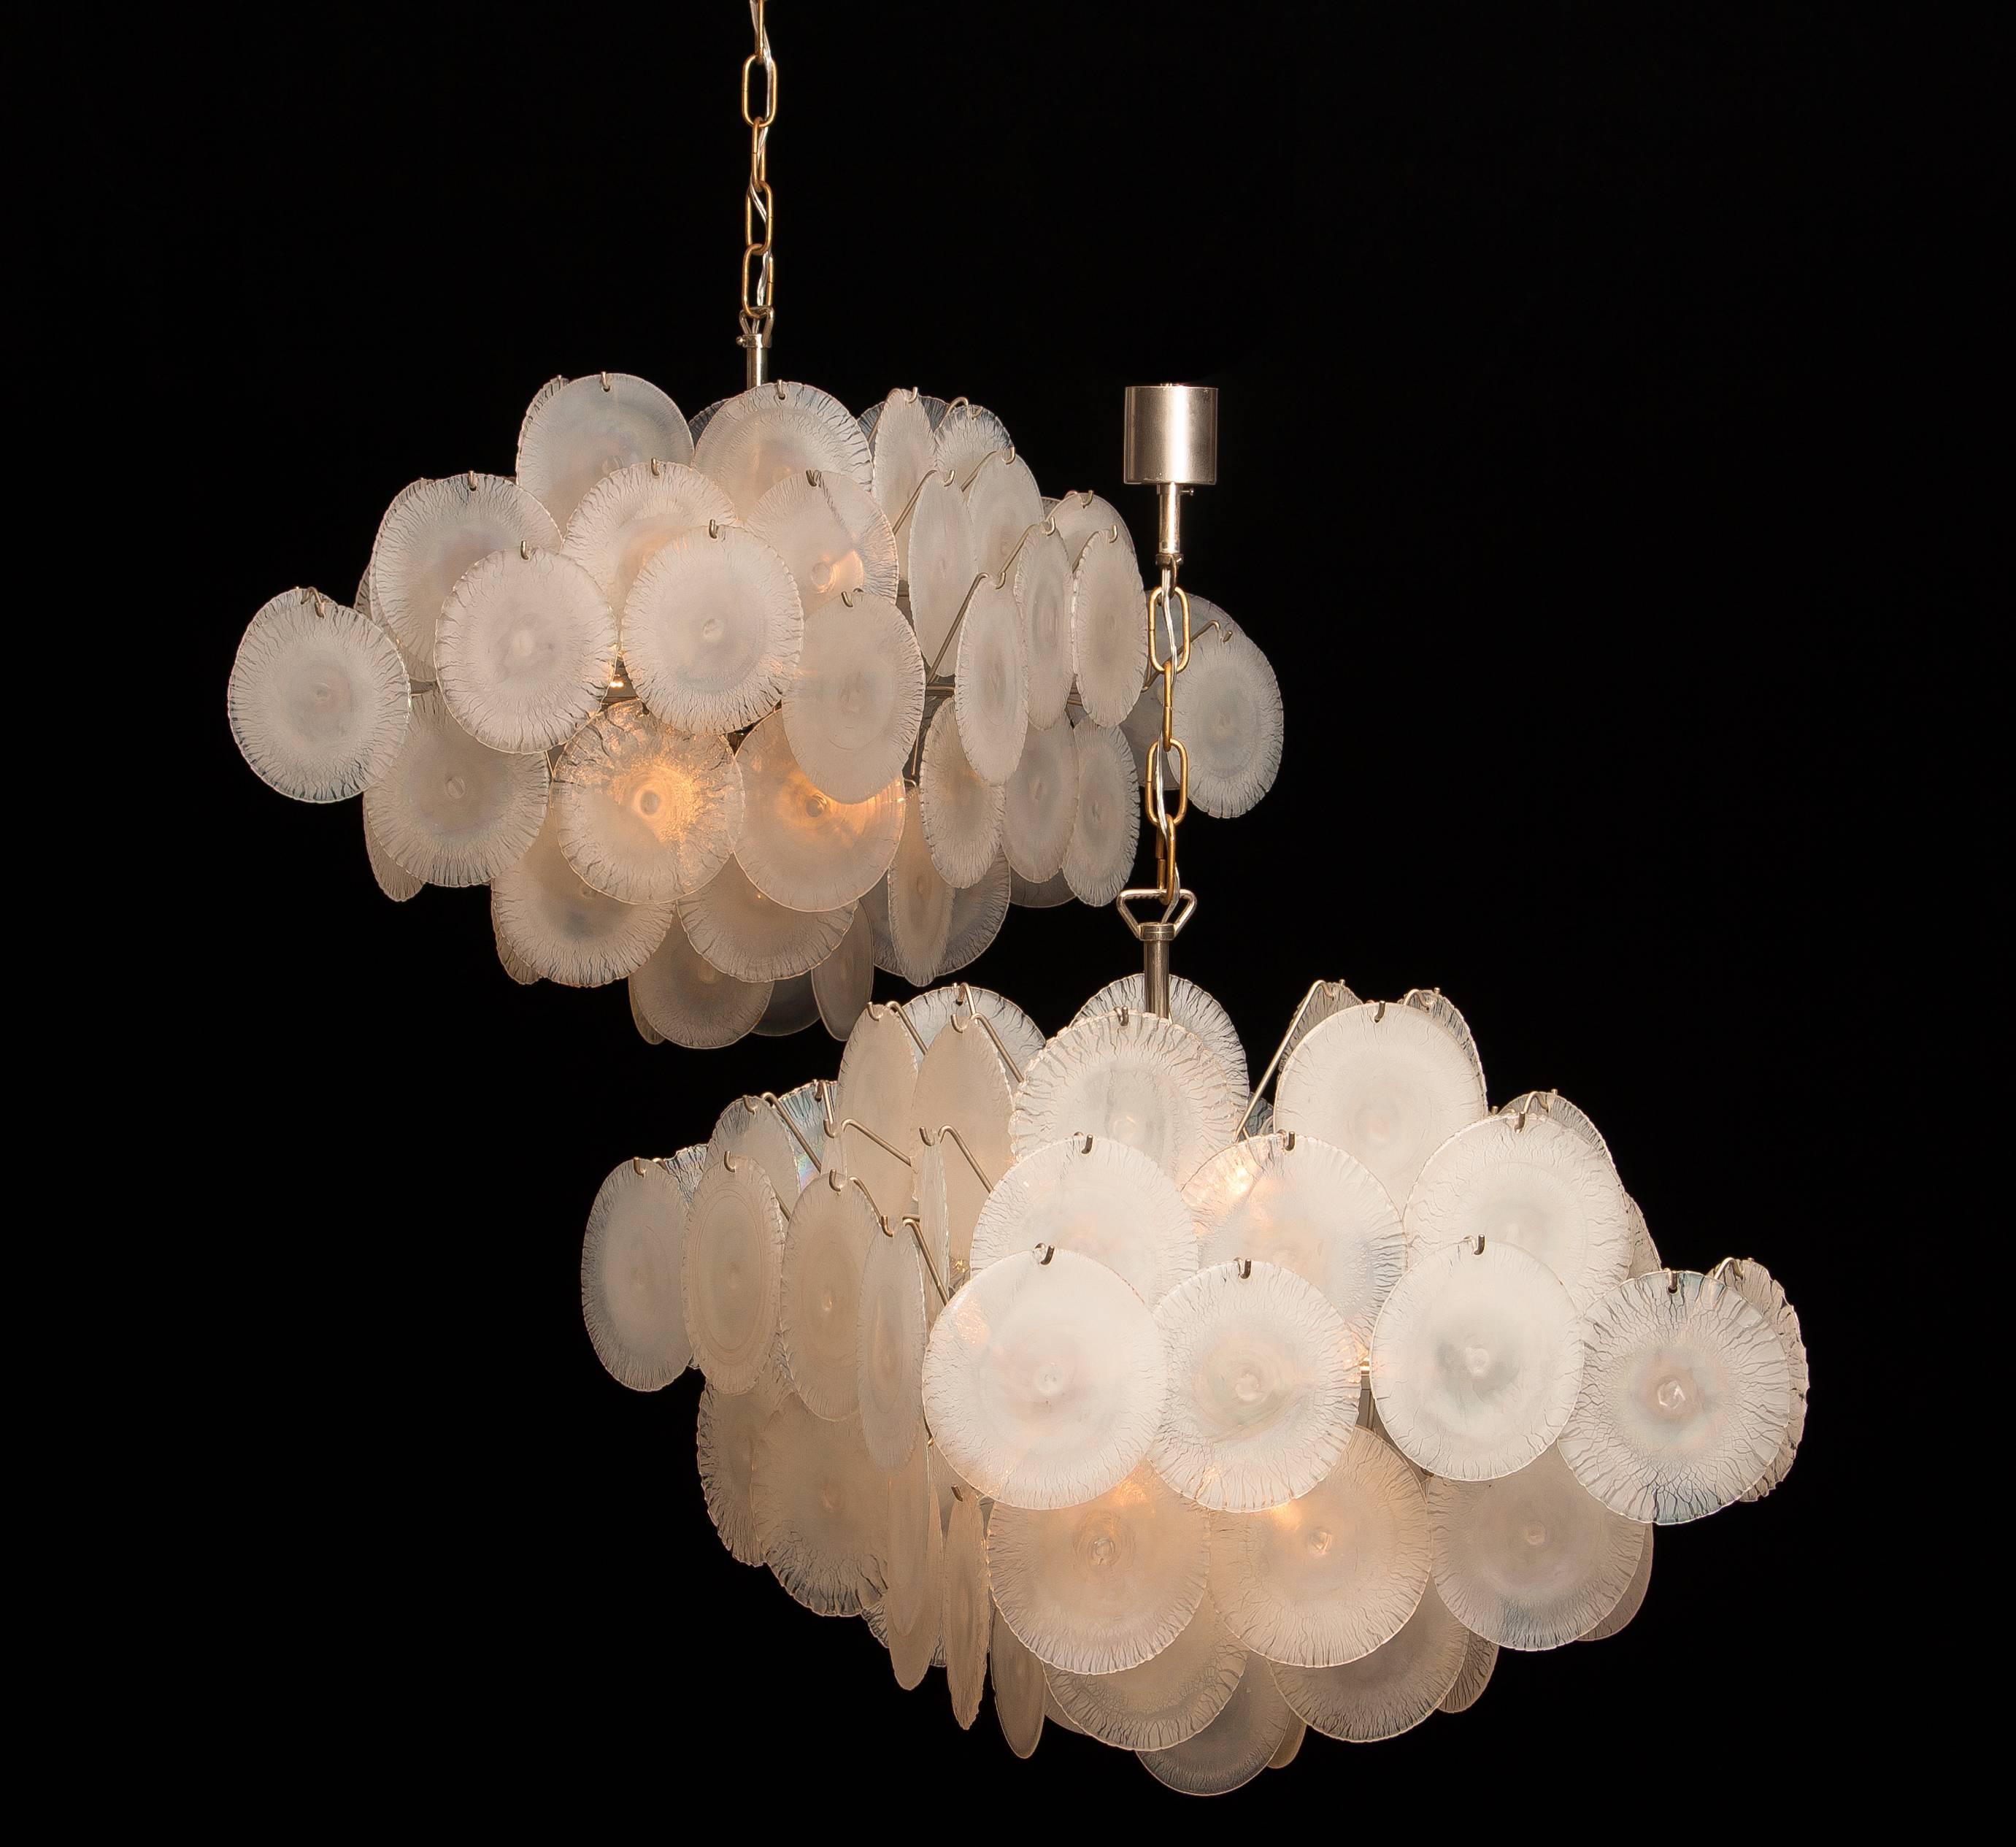 Set of Two Gino Vistosi Chandeliers with White or Pearl Murano Crystal Discs 1